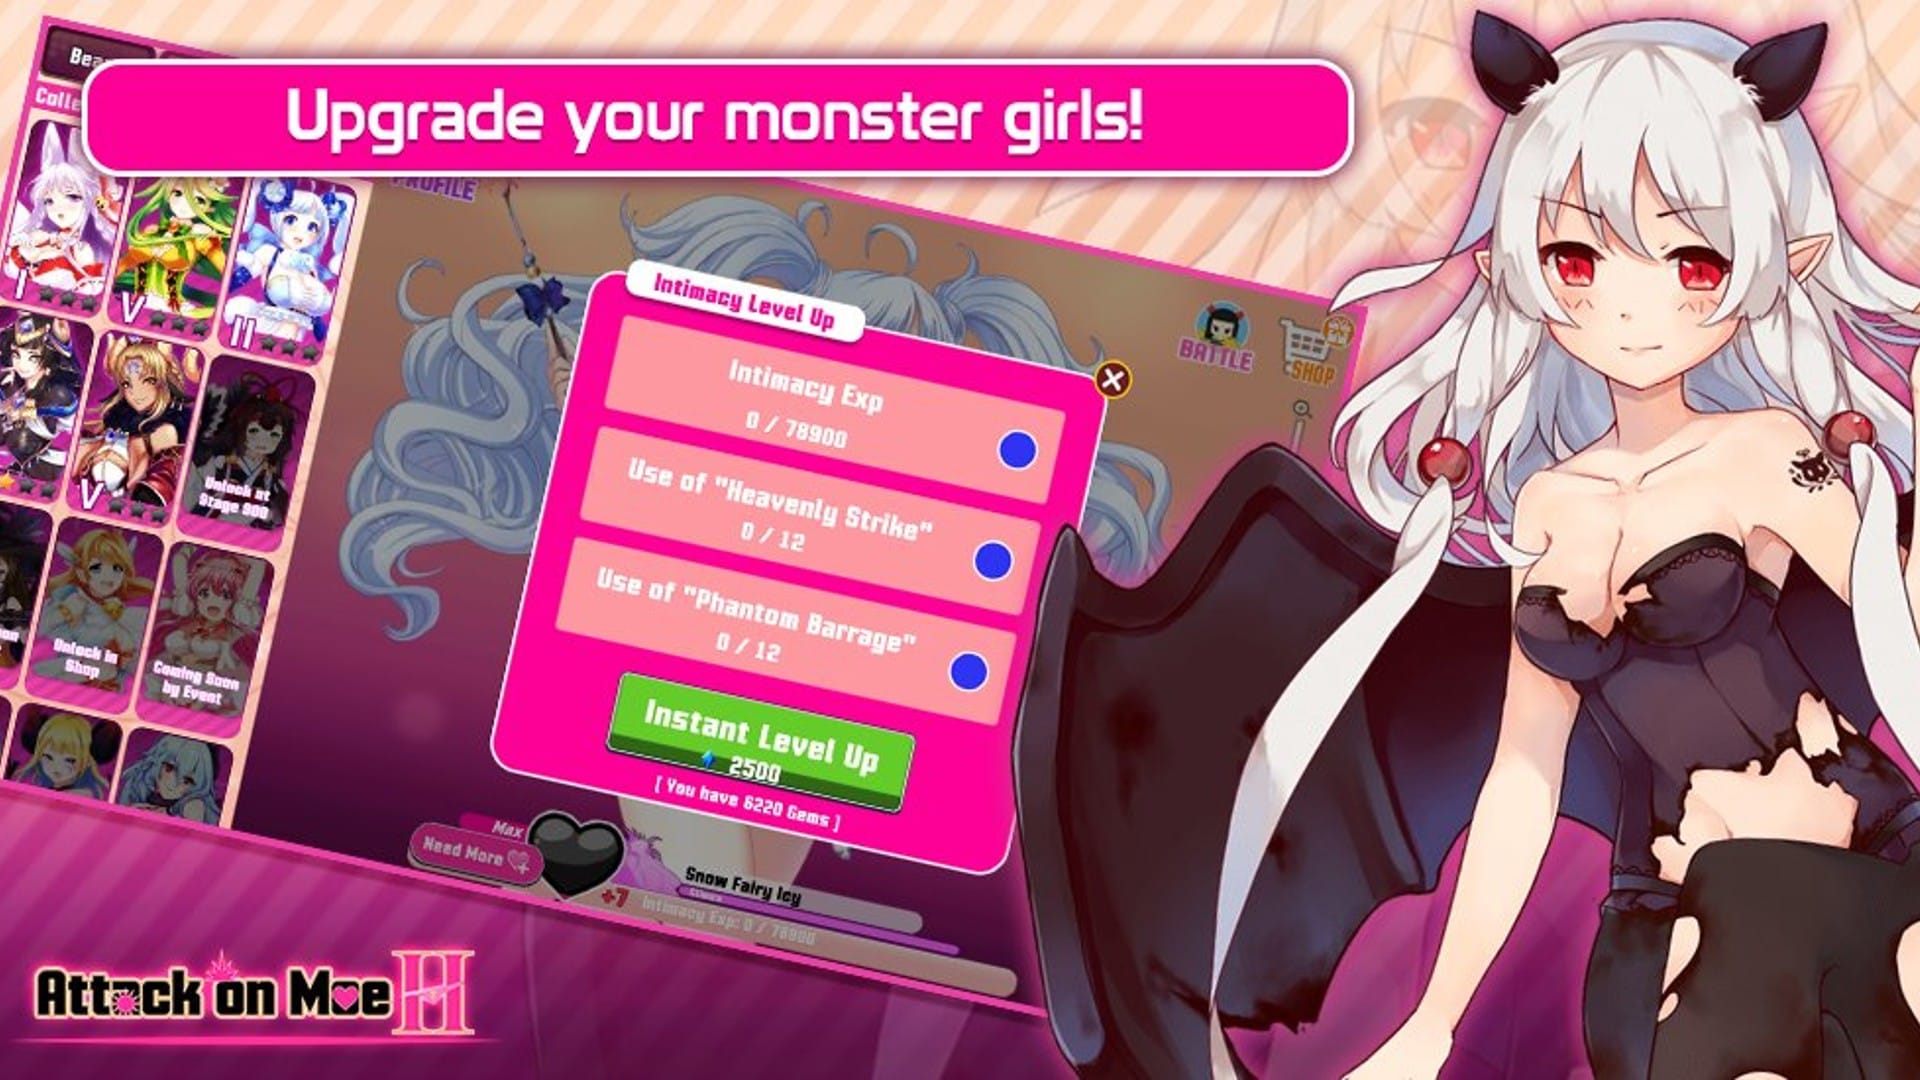 Nutaku Launches Project QT X Attack On Moe H Crossover Event TechRaptor.